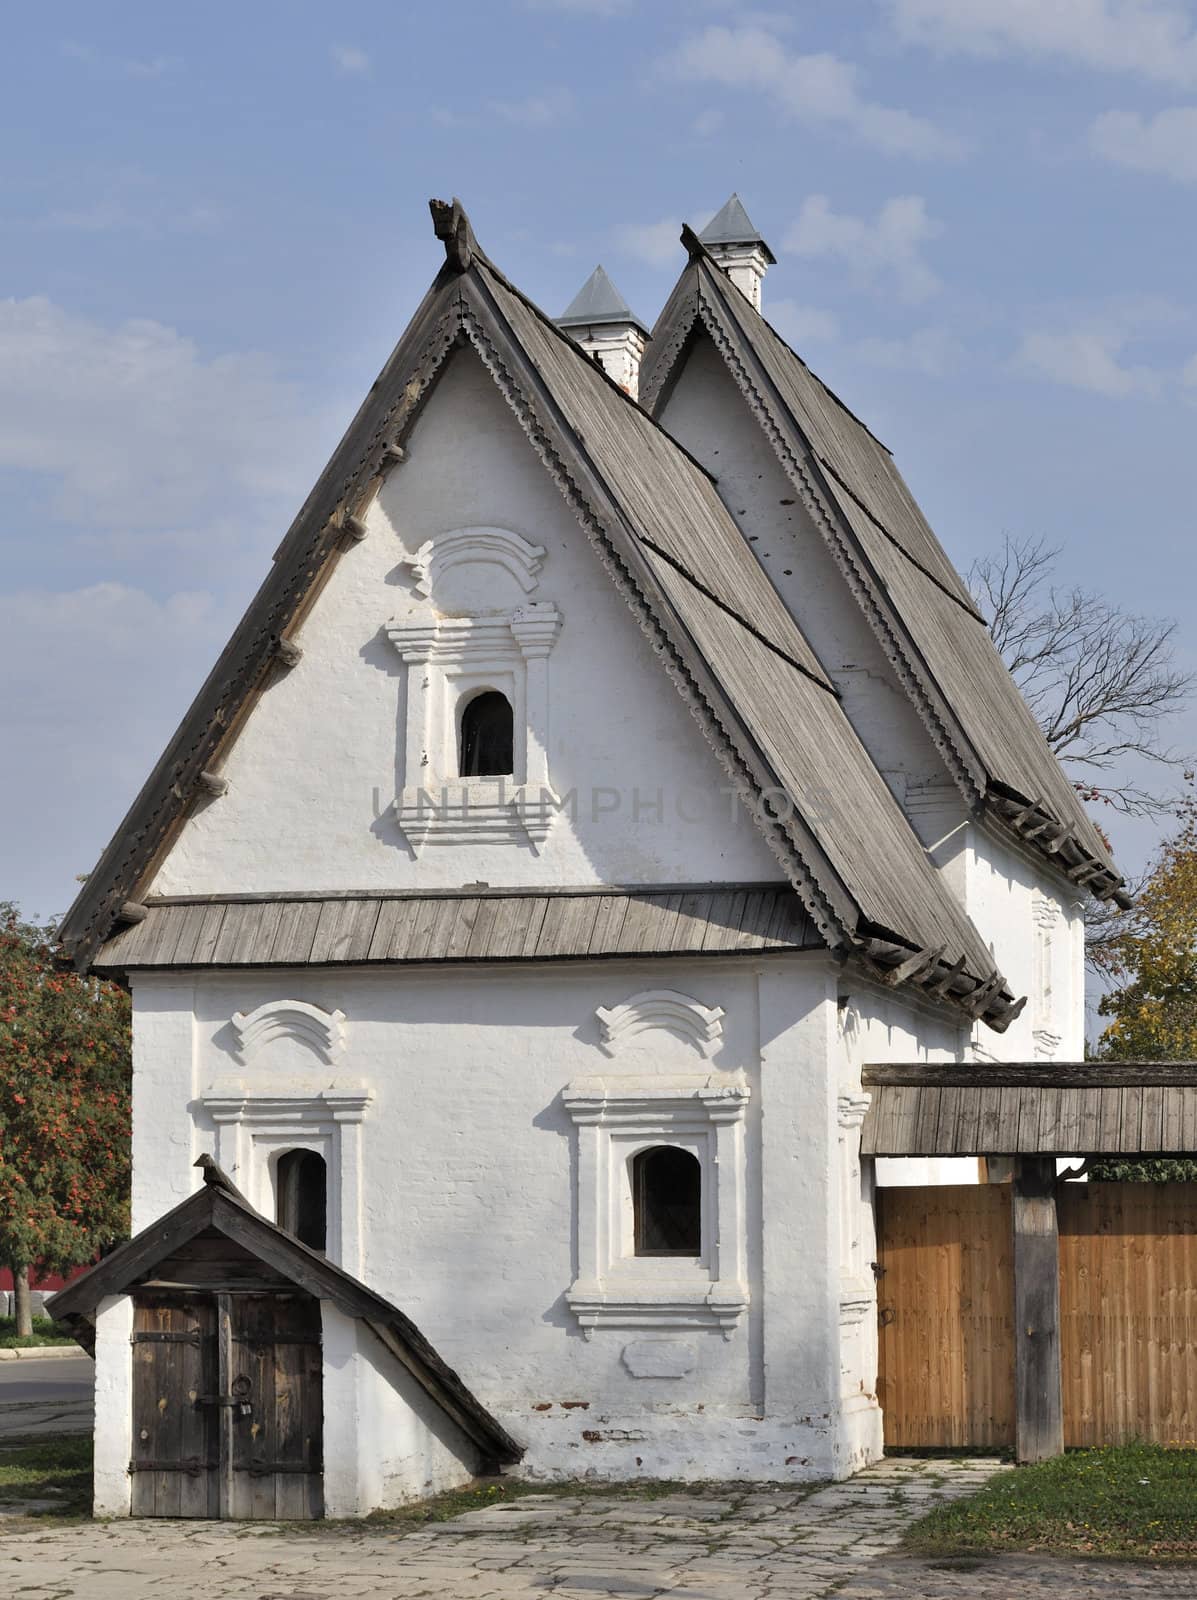 Little old stone house in ancient russian town Suzdal